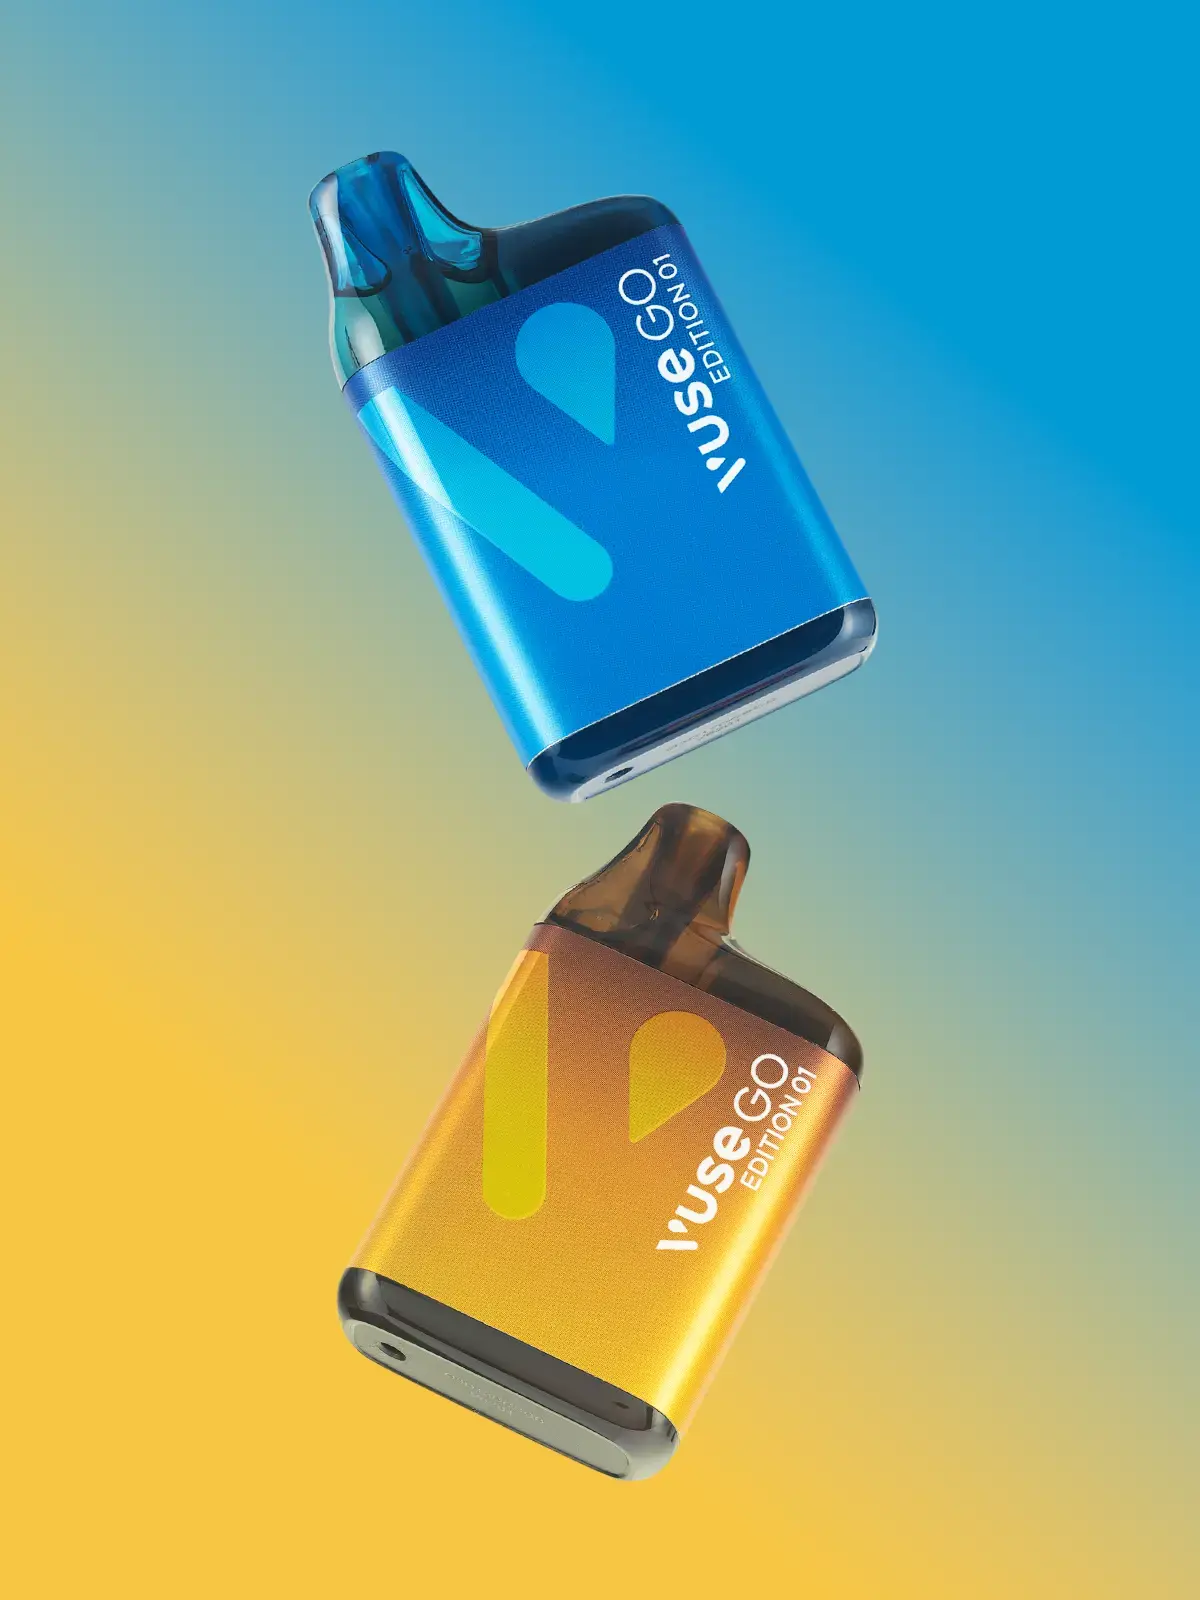 Two VUSE Go disposable devices floating in front of a blue and yellow background